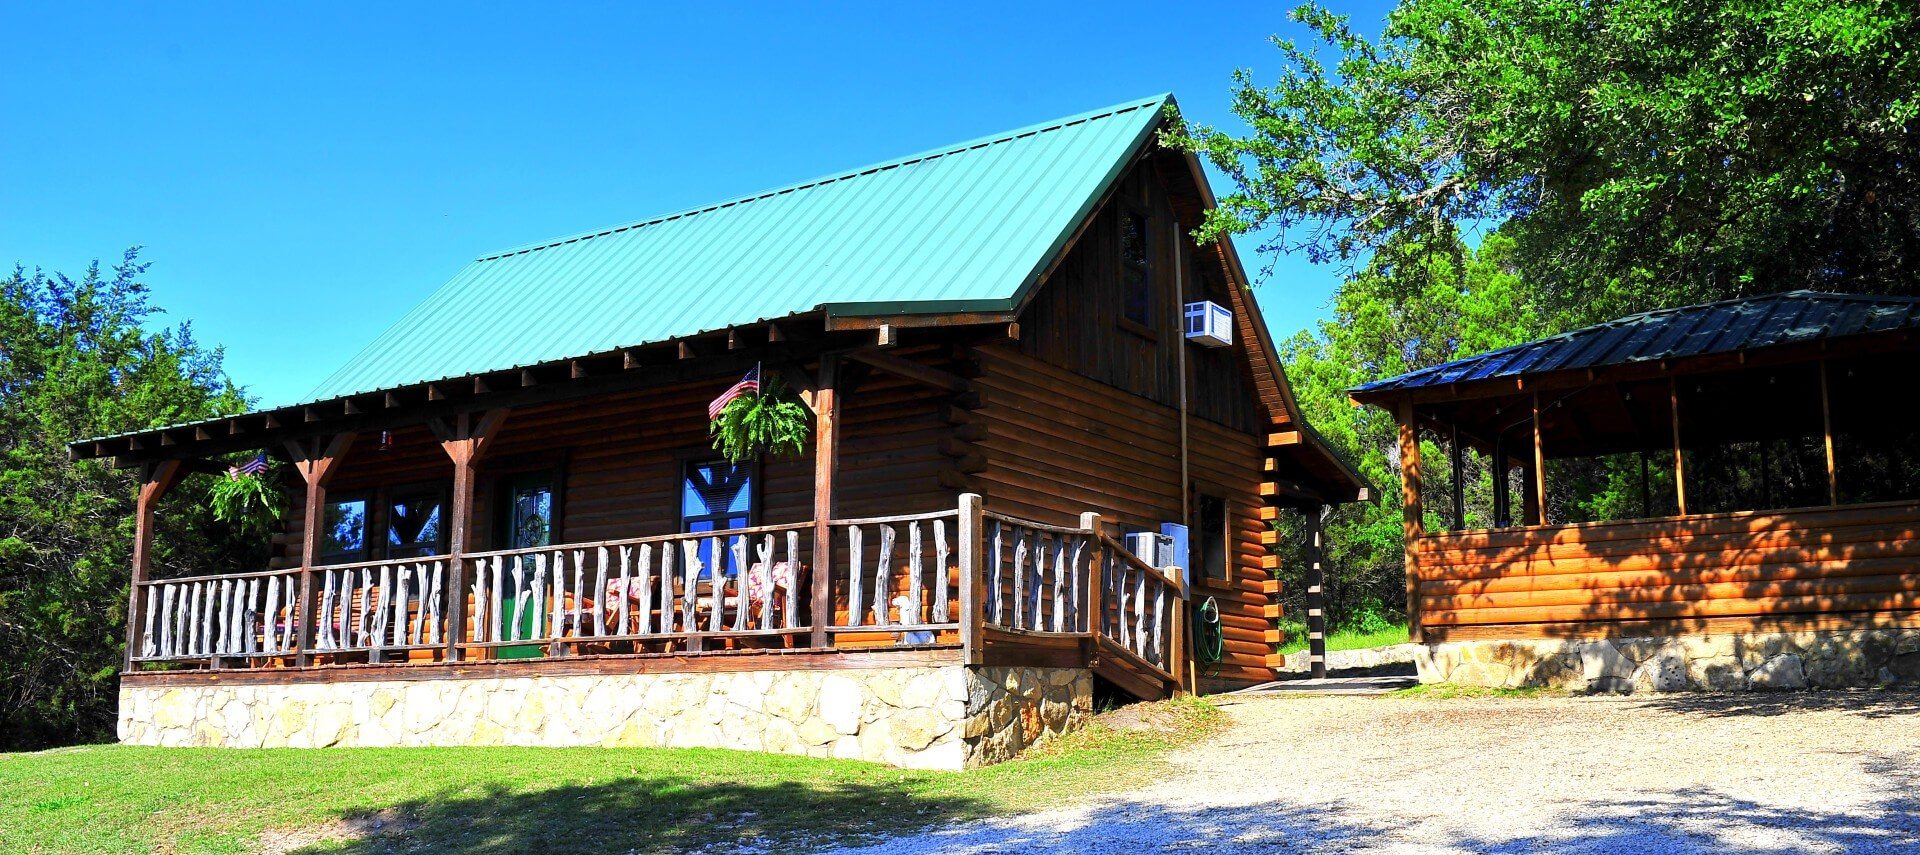 Wood log cabin with green roof, front porch with railing and side building with open air windows